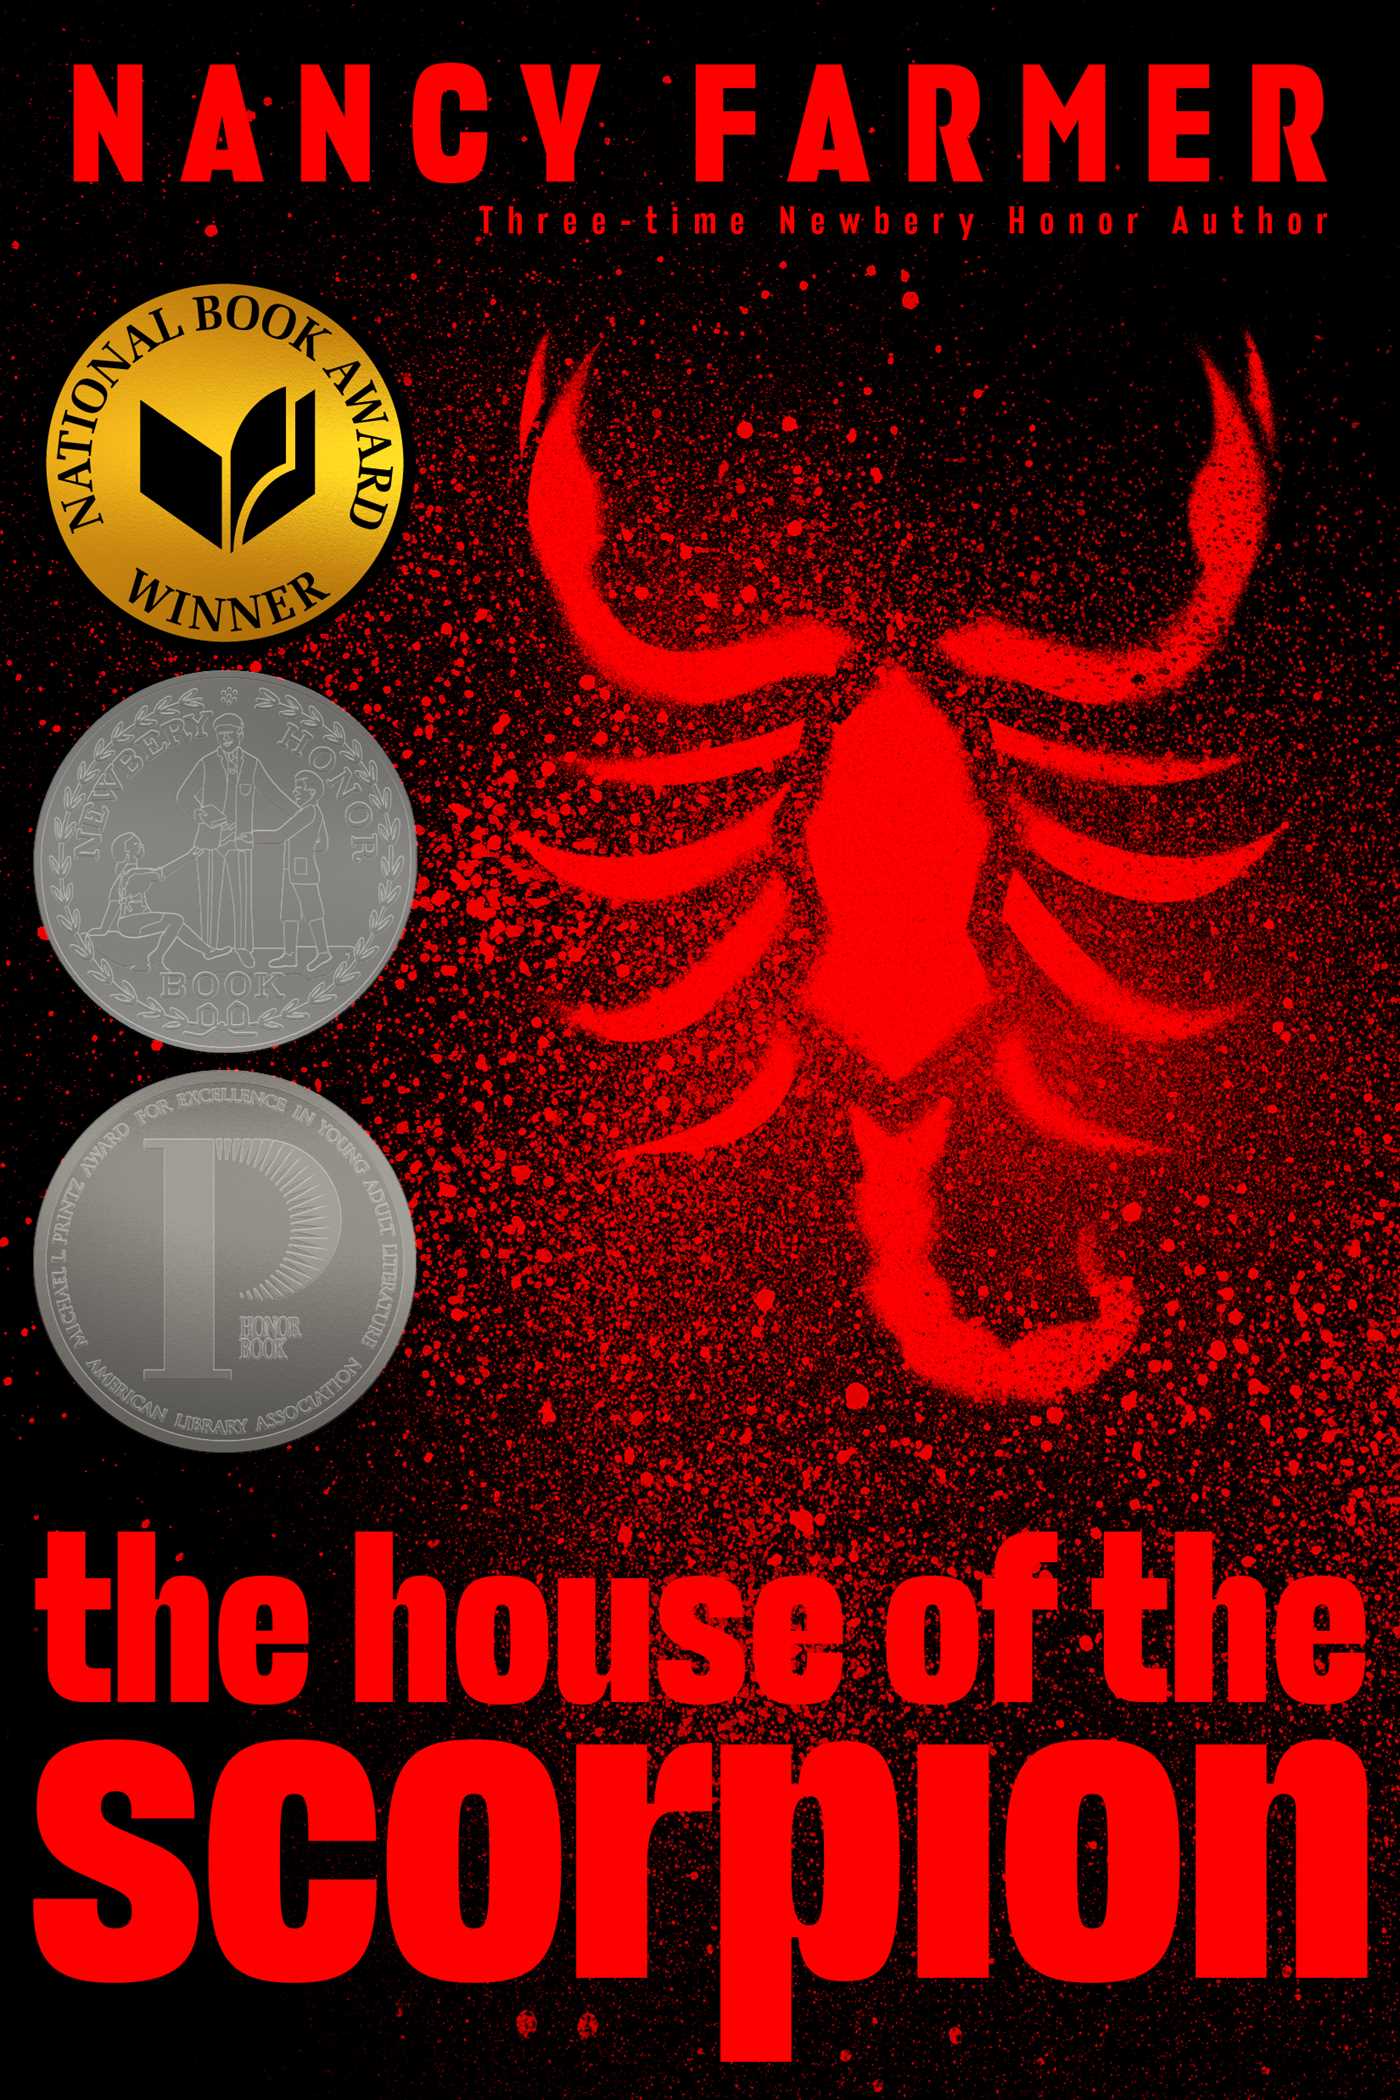 The House of the Scorpion book cover